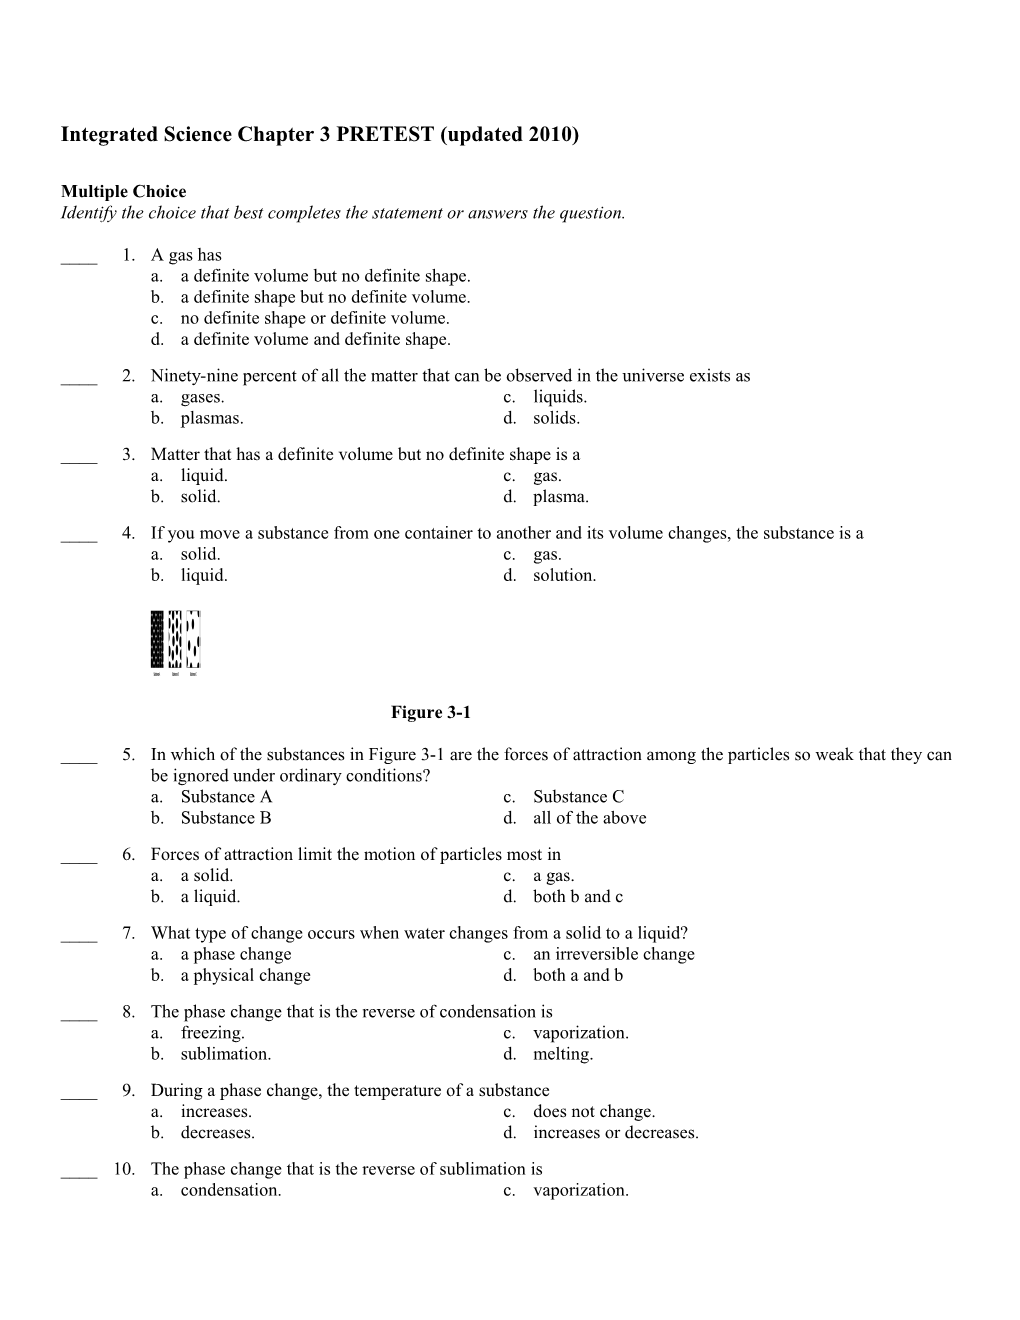 Integrated Science Chapter 3 PRETEST (Updated 2010)